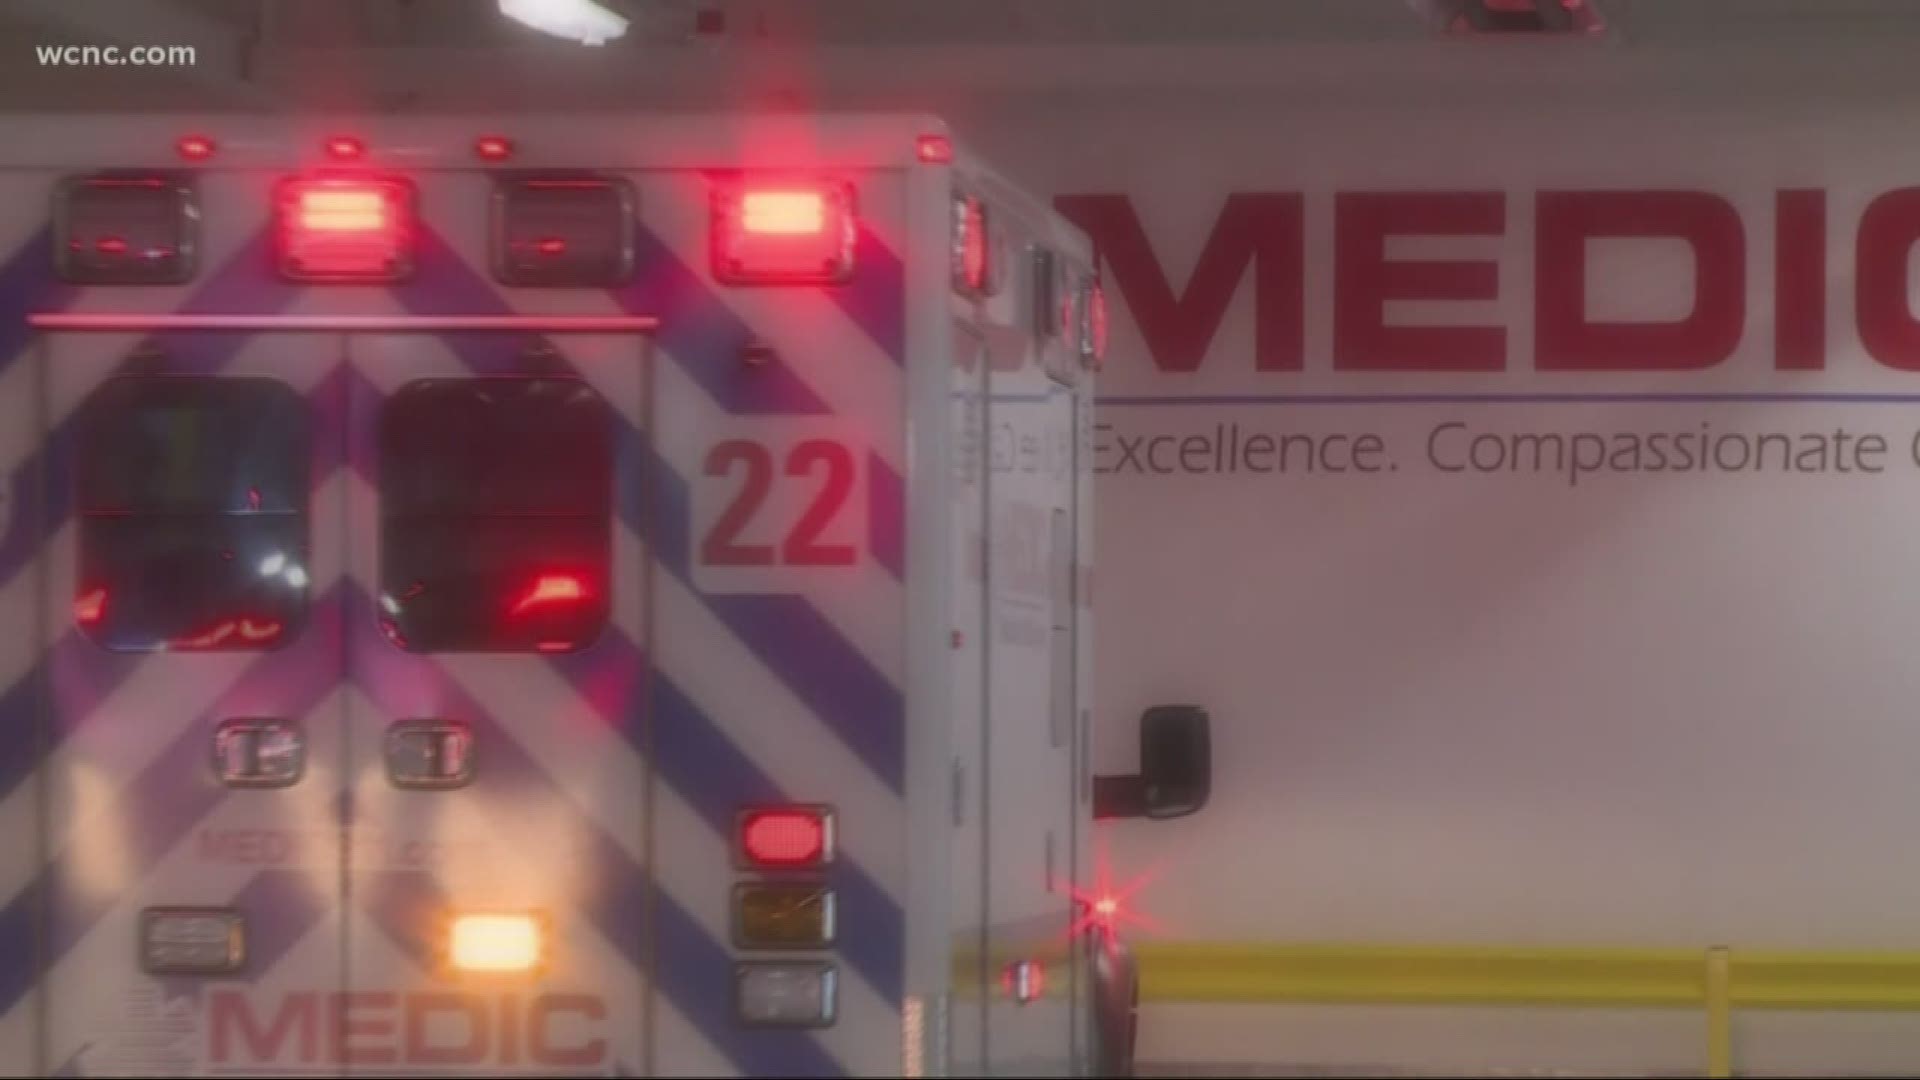 It comes after a paramedic with Mecklenburg County's medical emergency response team has tested positive for COVID-19.